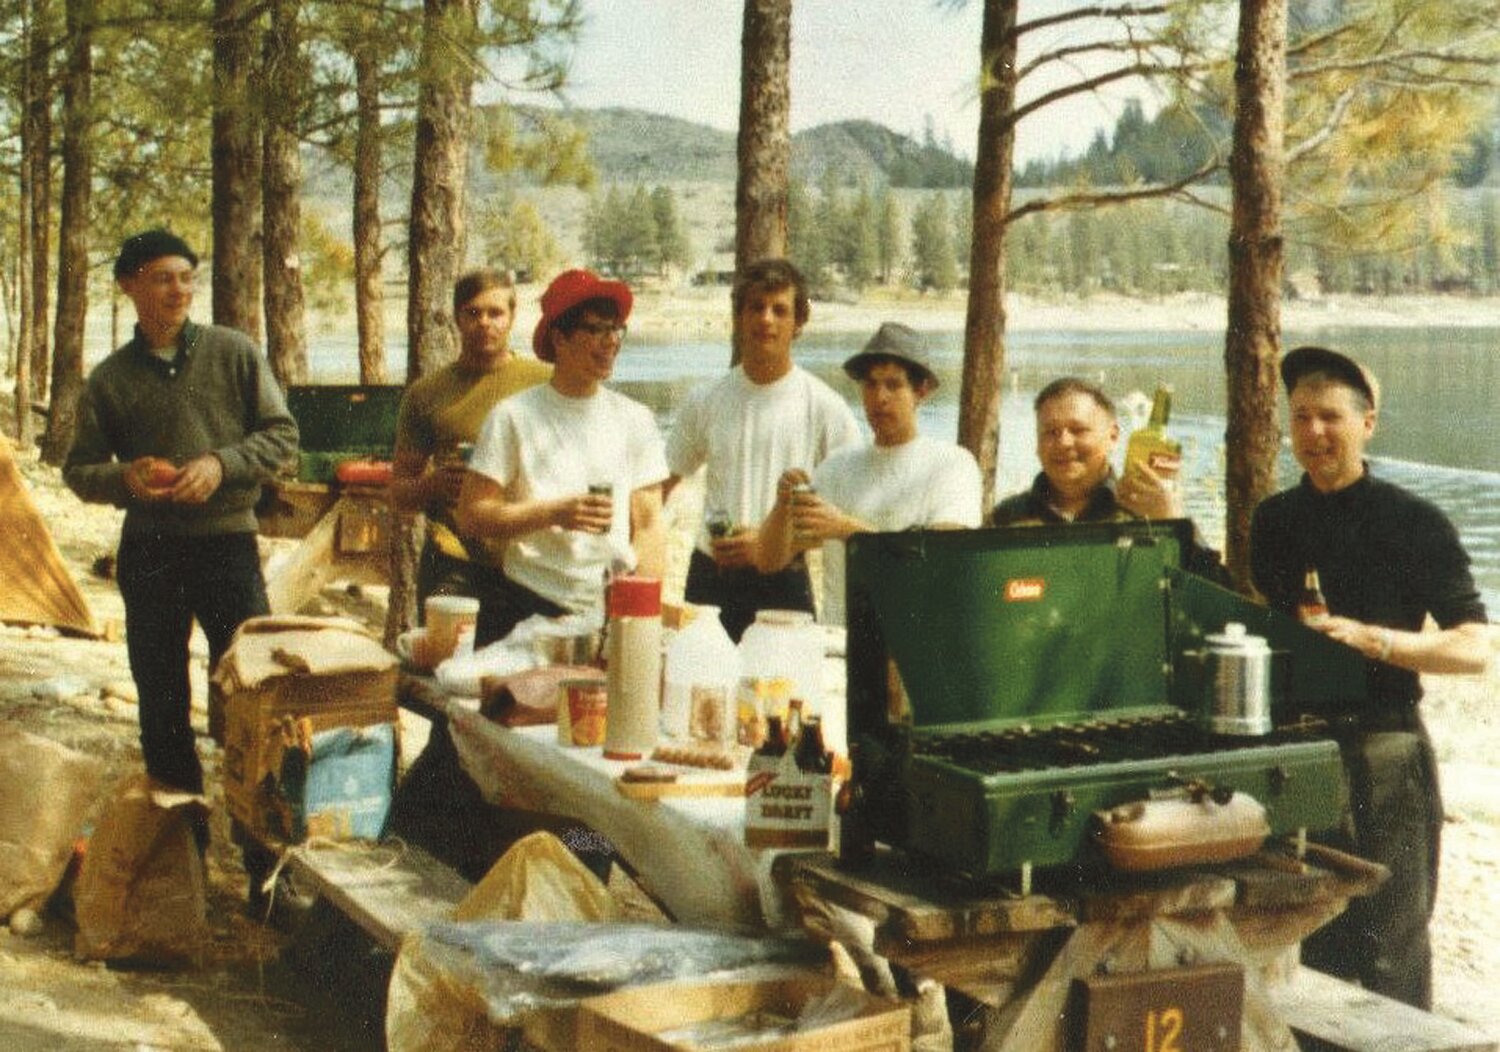 The gang that started what has become 60 years of gatherings at Alta Lake included, from left, Rich Dahl, Bob Wilkes, Tom Anderson, Chris Anderson, Steve Anderson, Dick Dahl, and Ron Anderson.